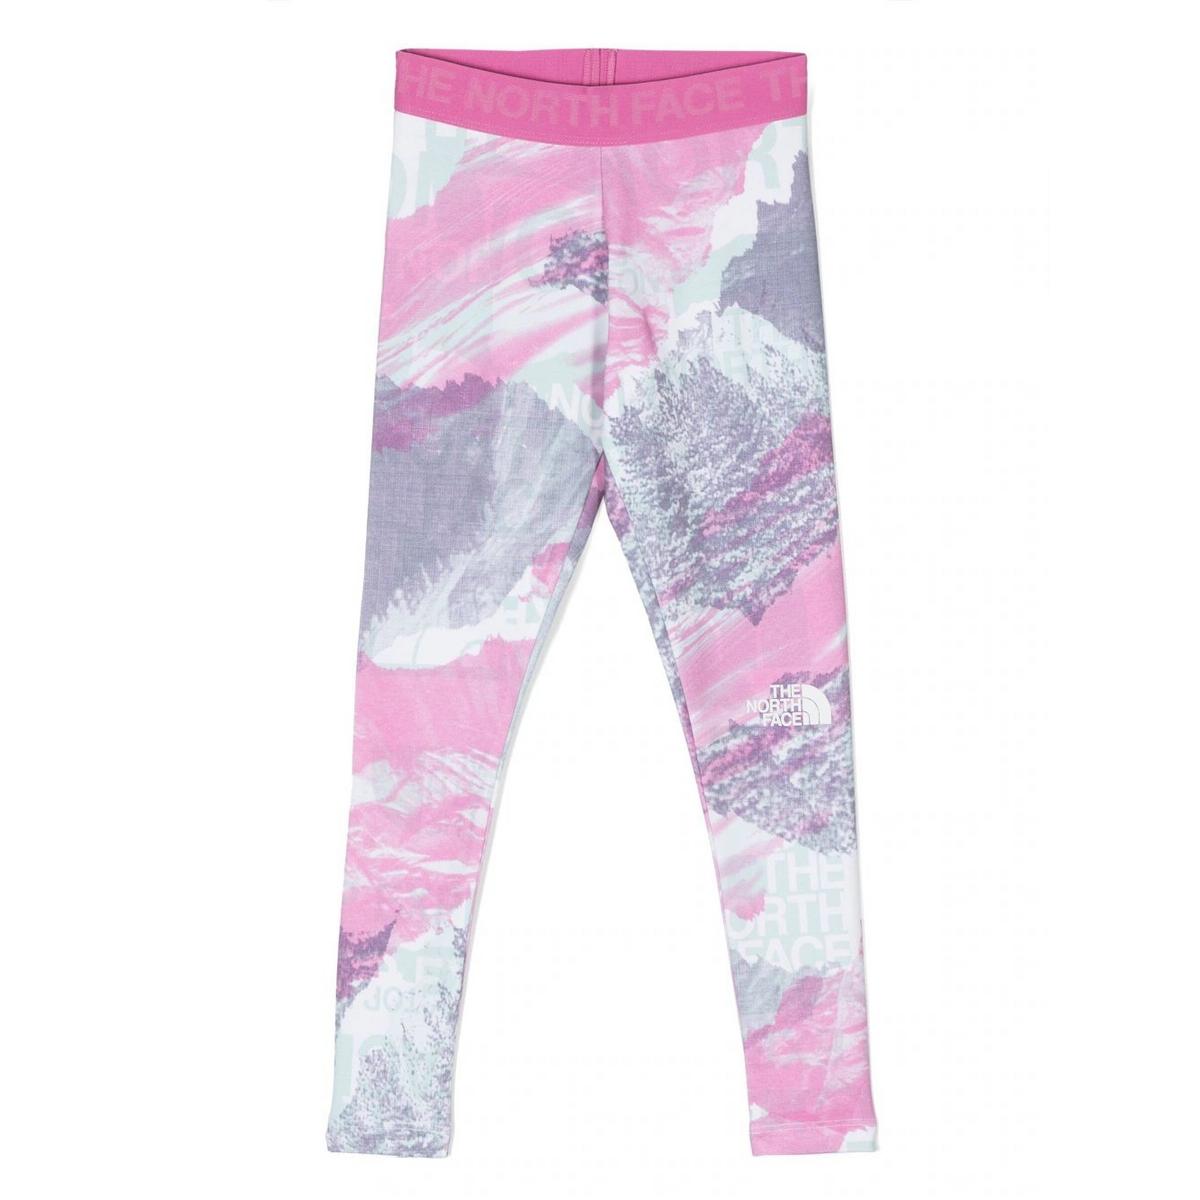 The North Face Kid's Everyday Leggings - Super Pink Print